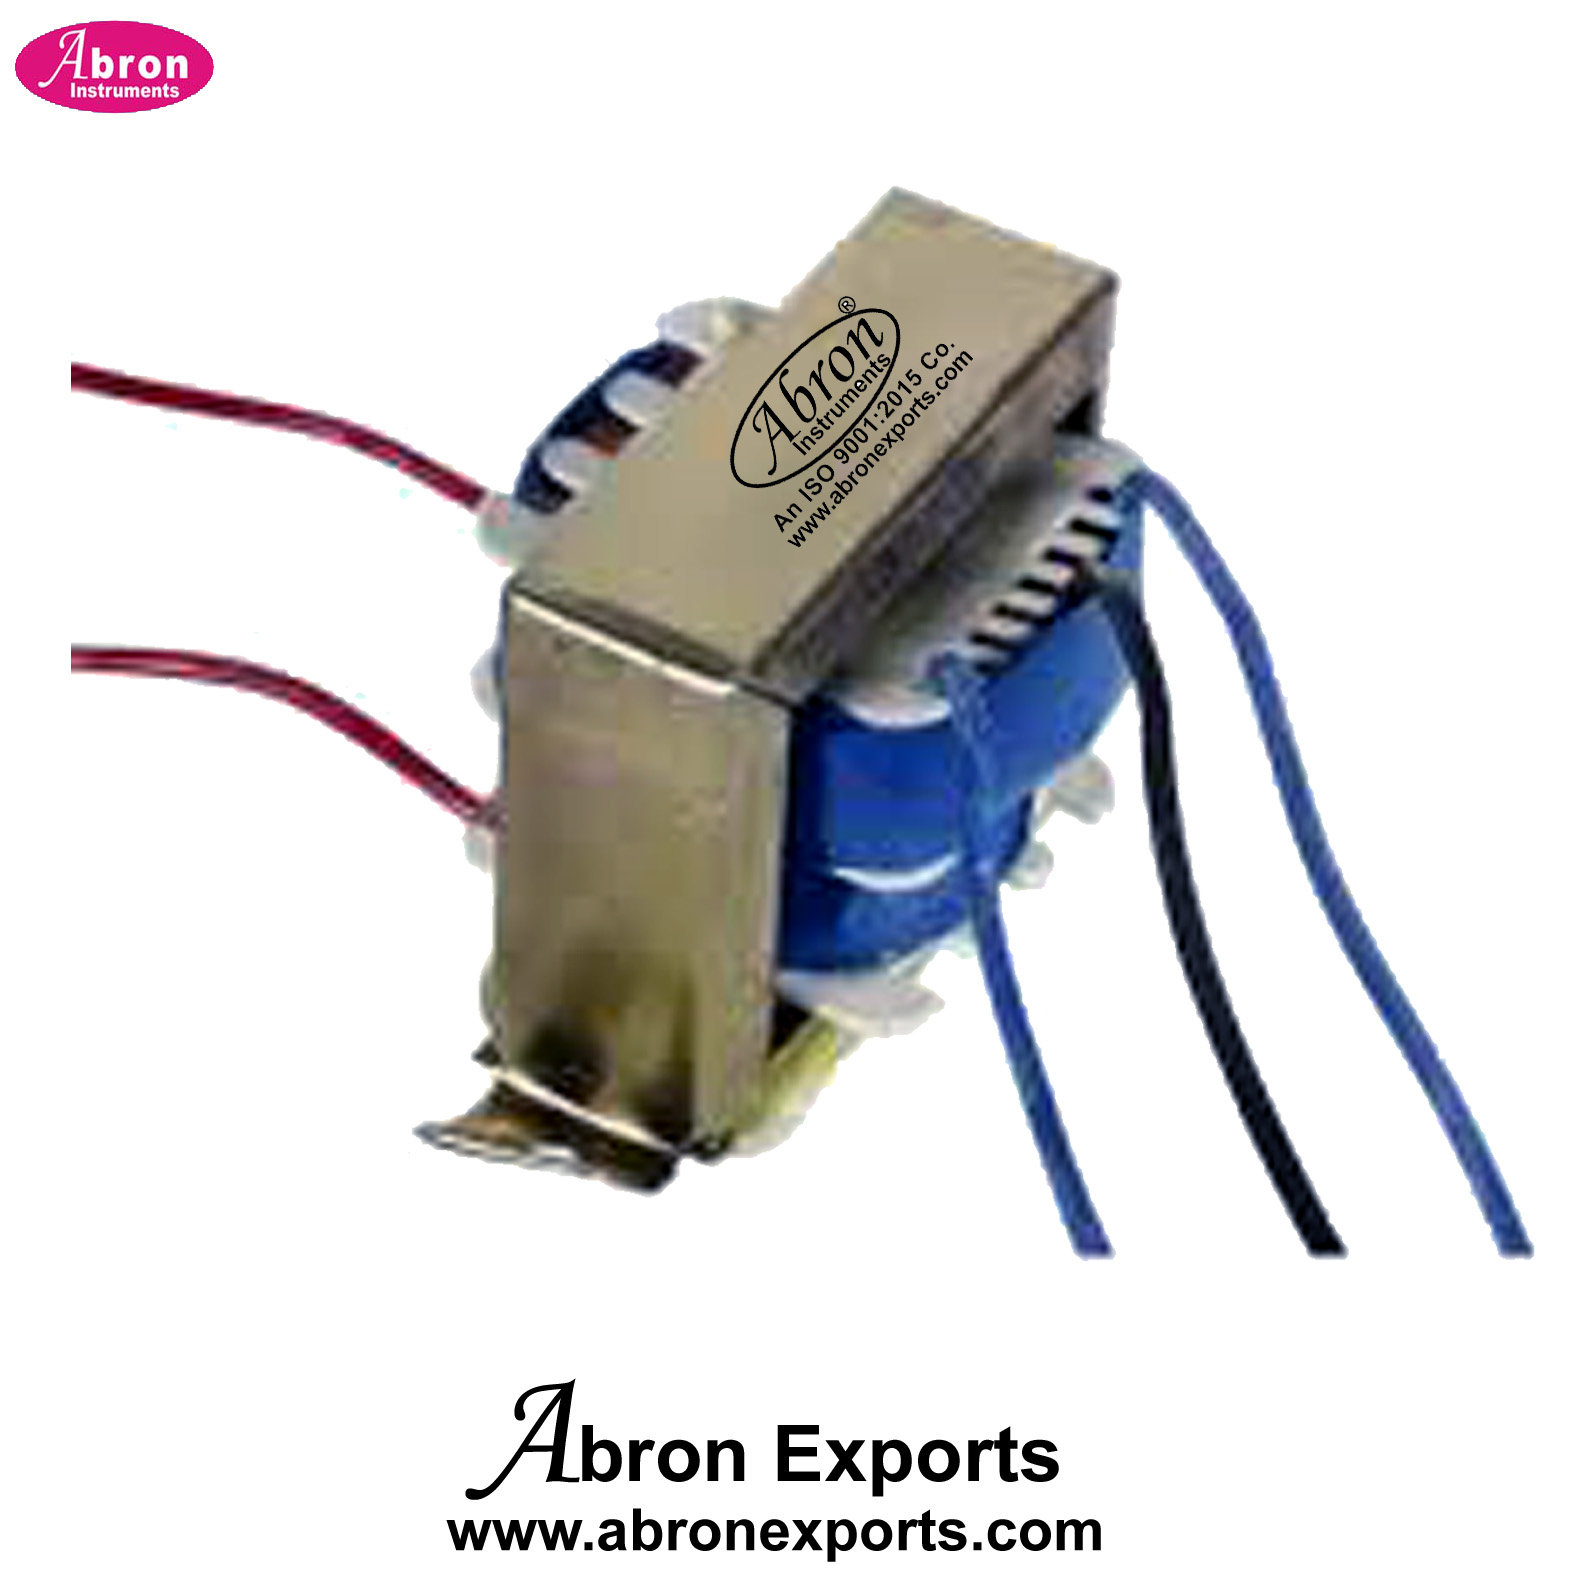 Transformer Output -6-0-6 AC Step Dowm input 220v AC use Ractifier for DC Output Abron AE-1429TX1A 